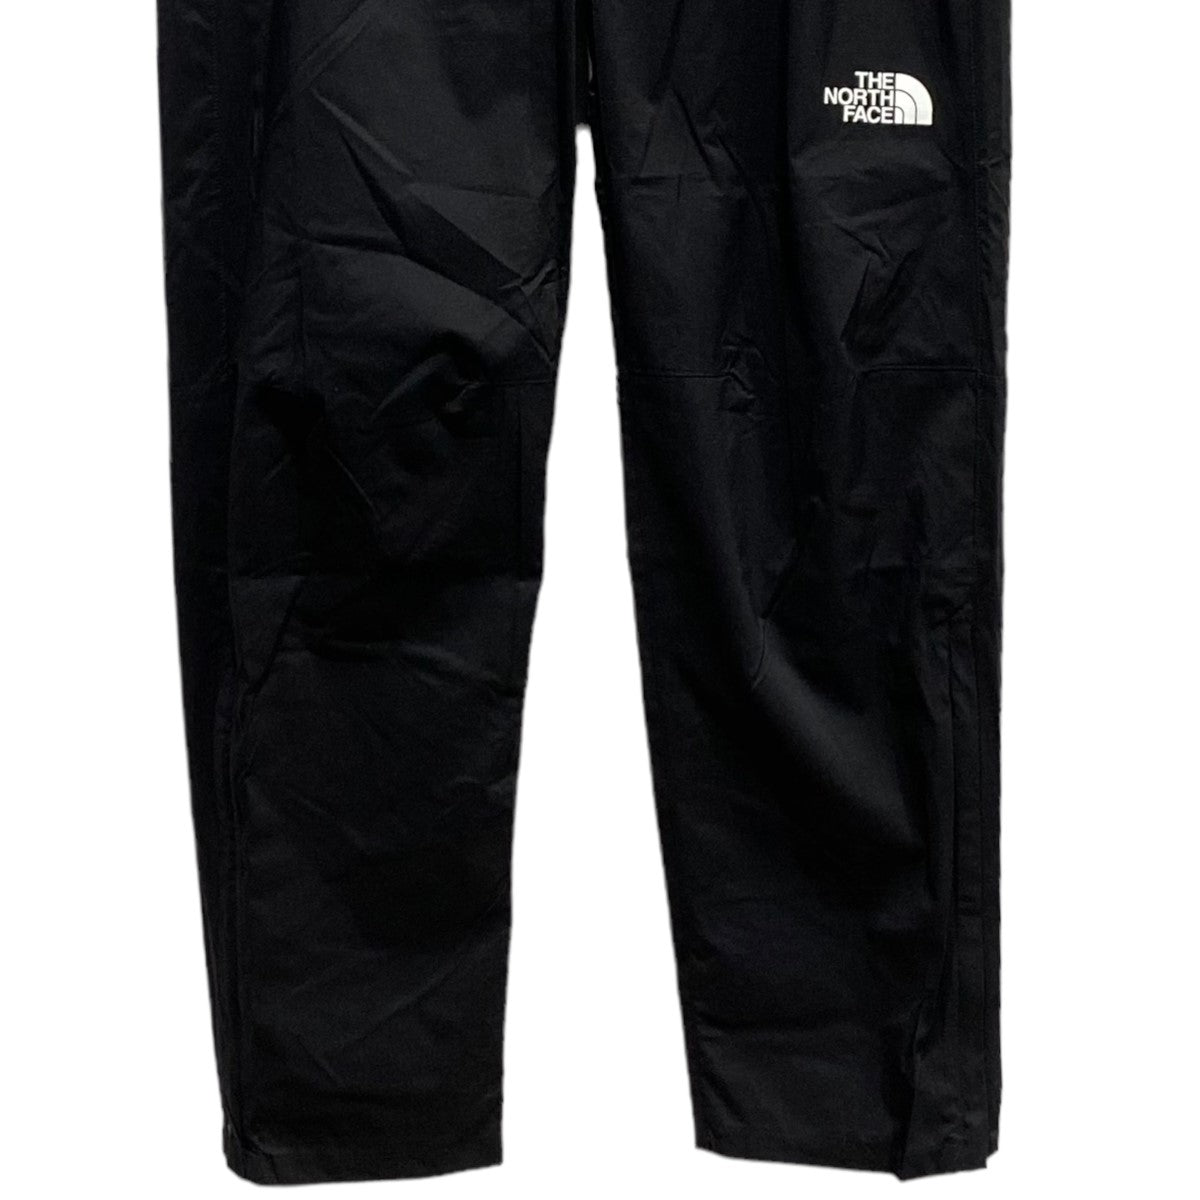 THE NORTH FACE(ザノースフェイス) Anytime Wind Long PantナイロンパンツNB32402Z